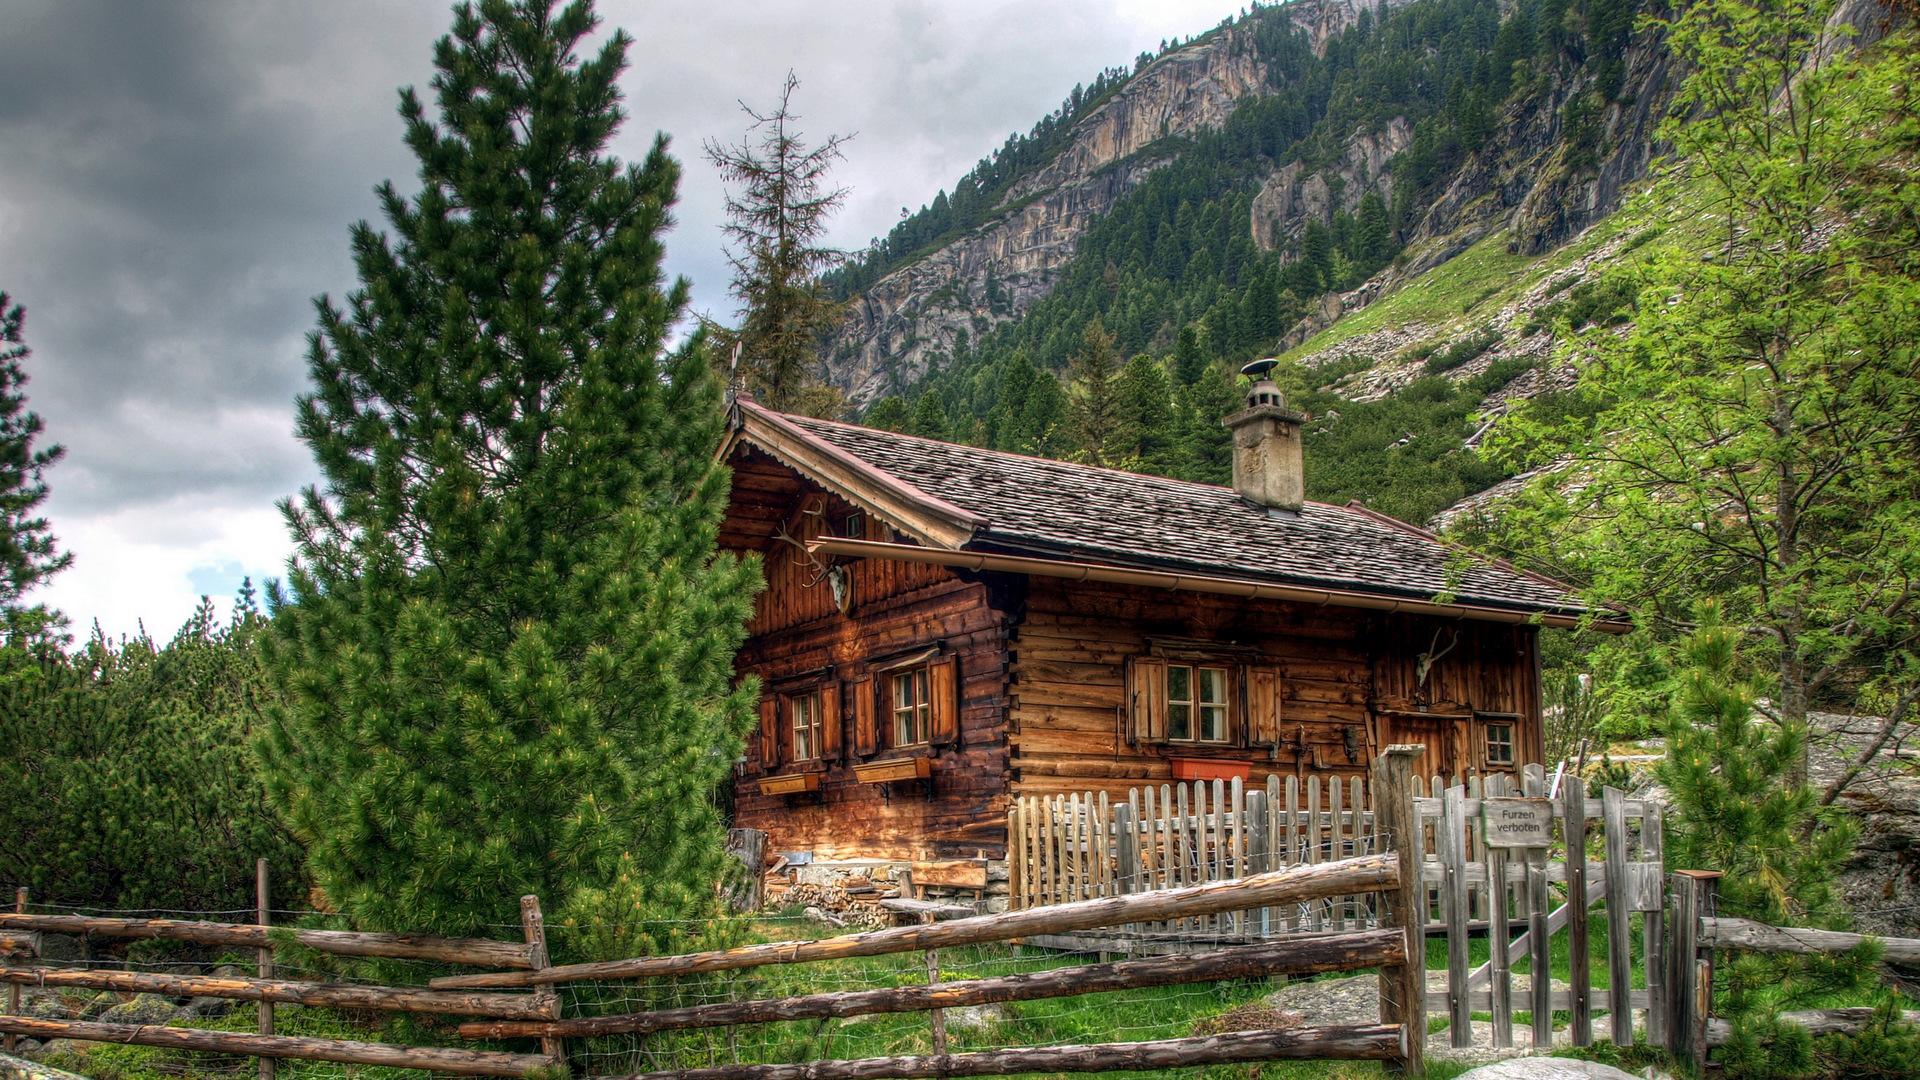 Magical Wood Cabins To Inspire Your Next Off The Grid Vacay